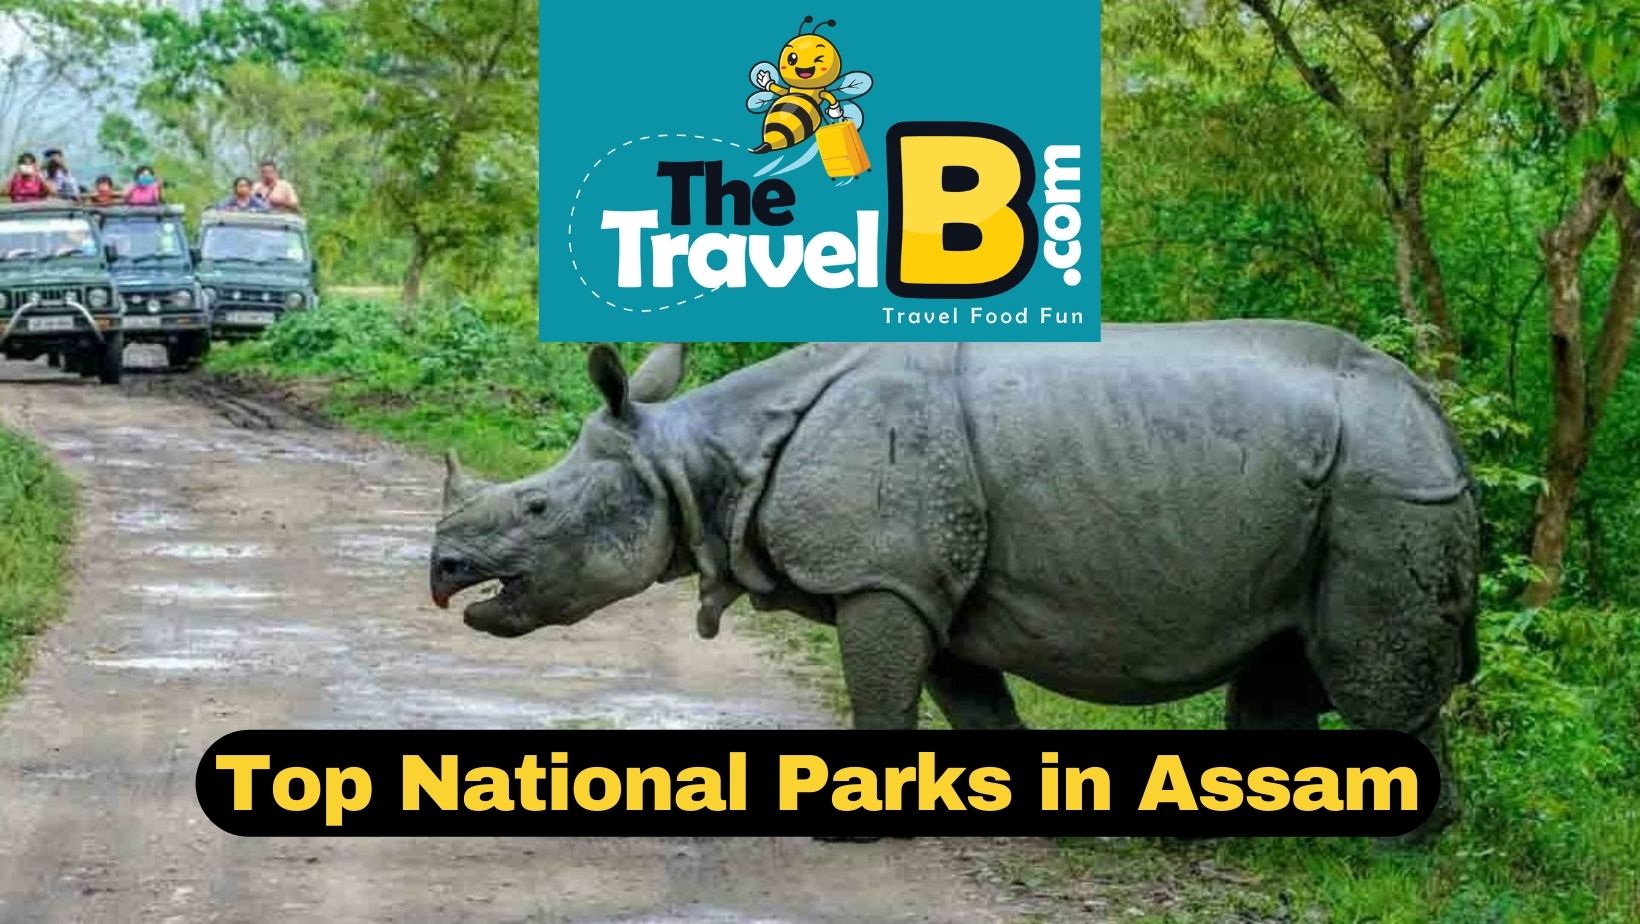 Know More About Top National Parks in Assam